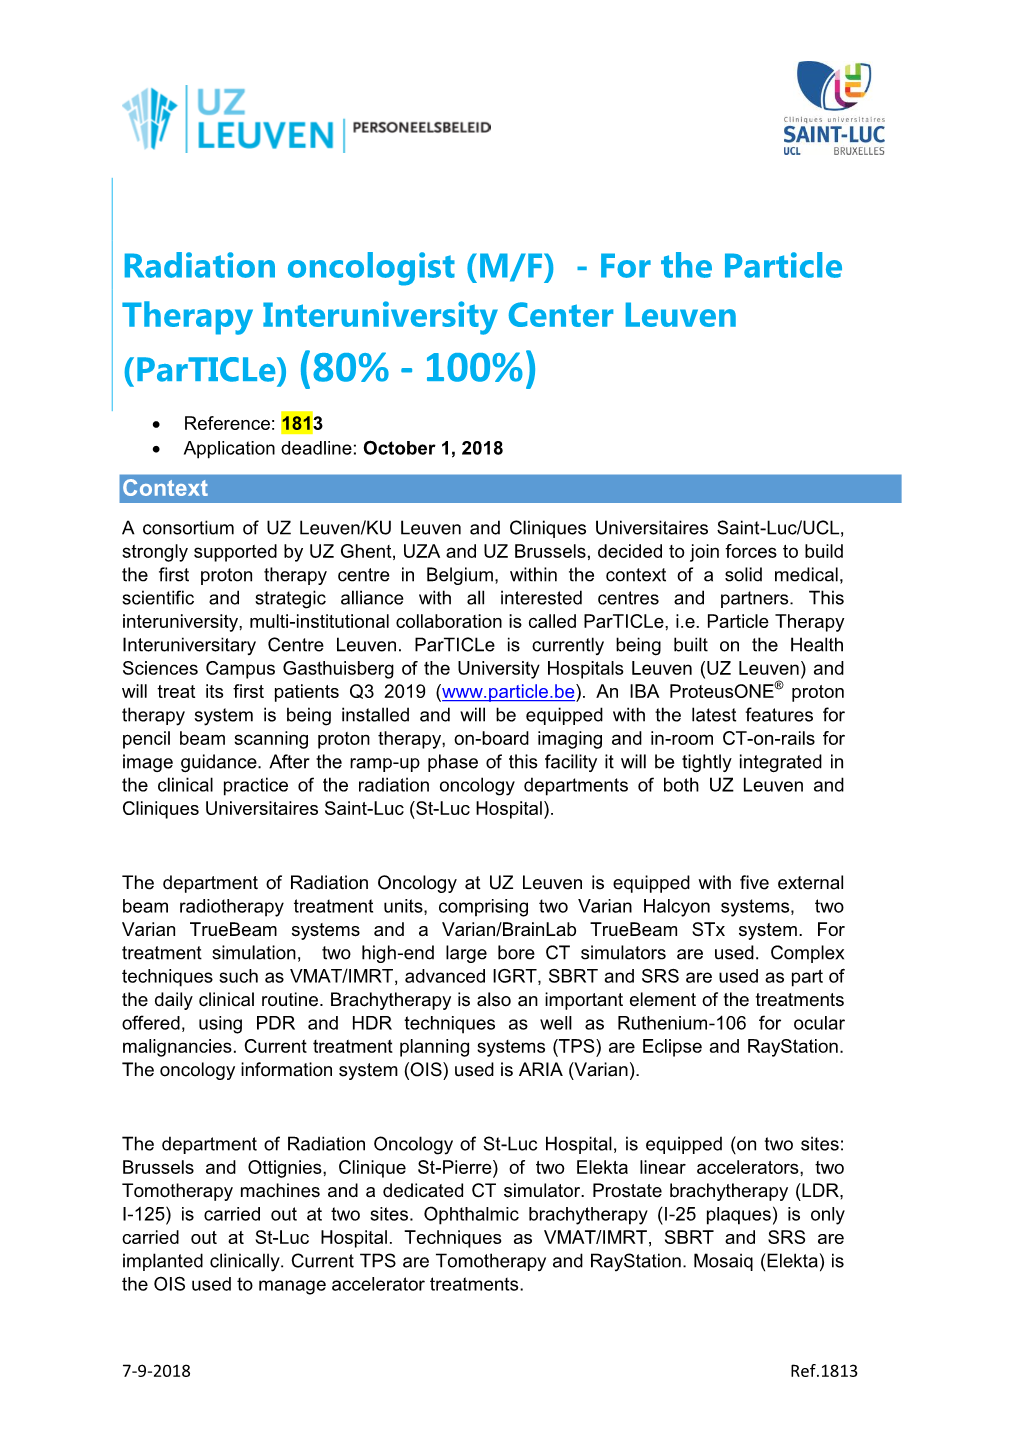 Radiation Oncologist (M/F) - for the Particle Therapy Interuniversity Center Leuven (Particle) (80% - 100%)